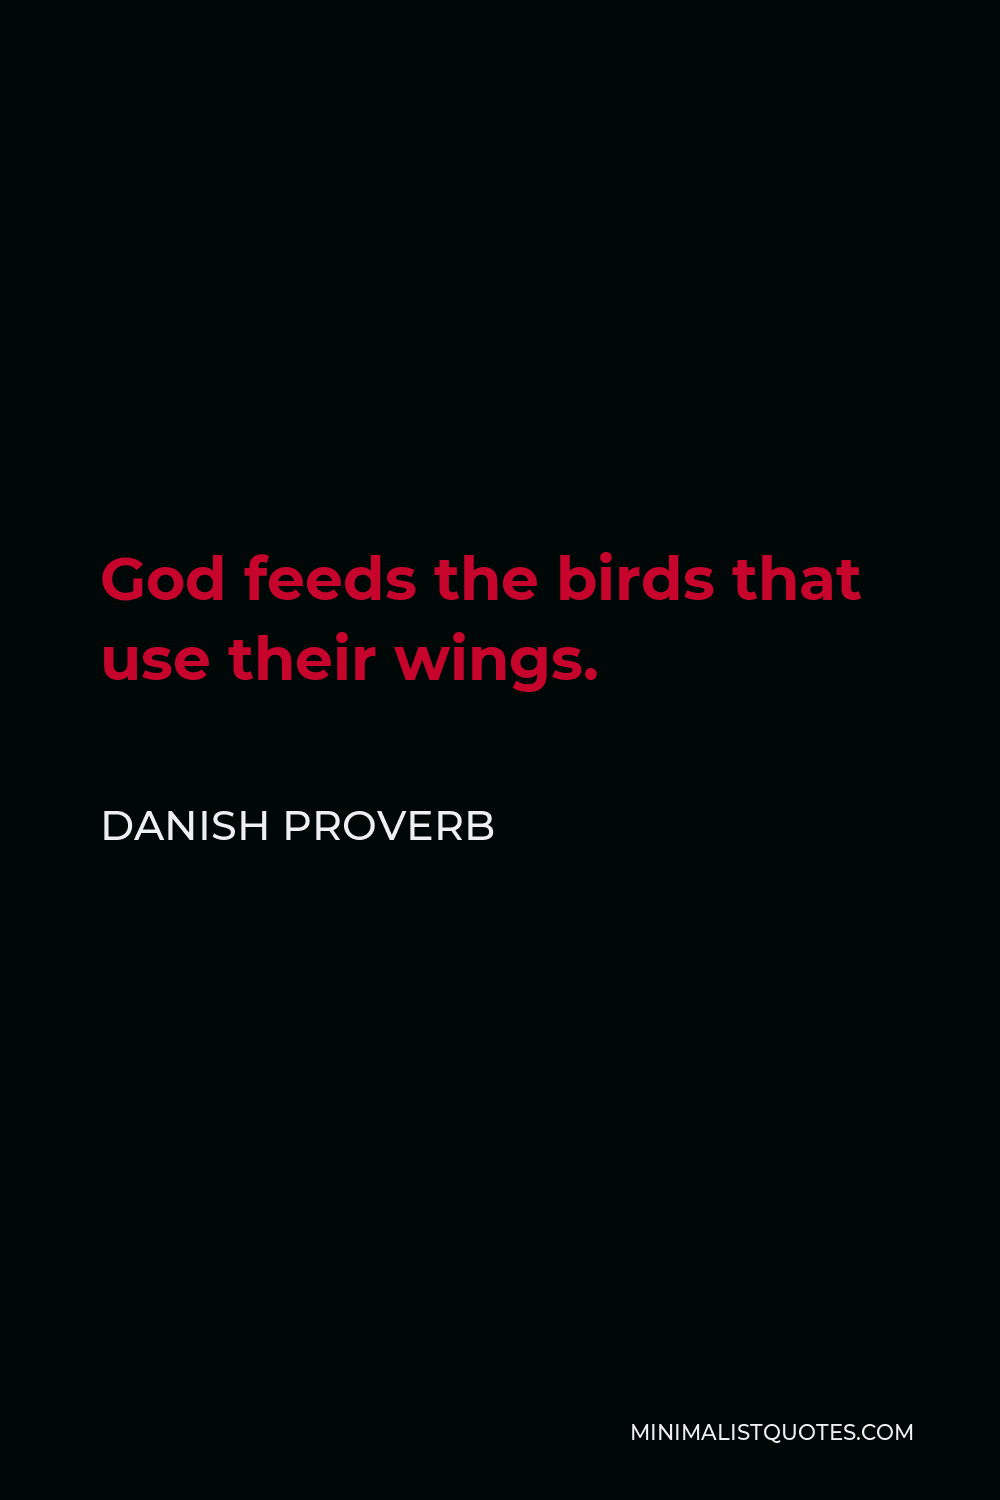 Danish Proverb Quote - God feeds the birds that use their wings.